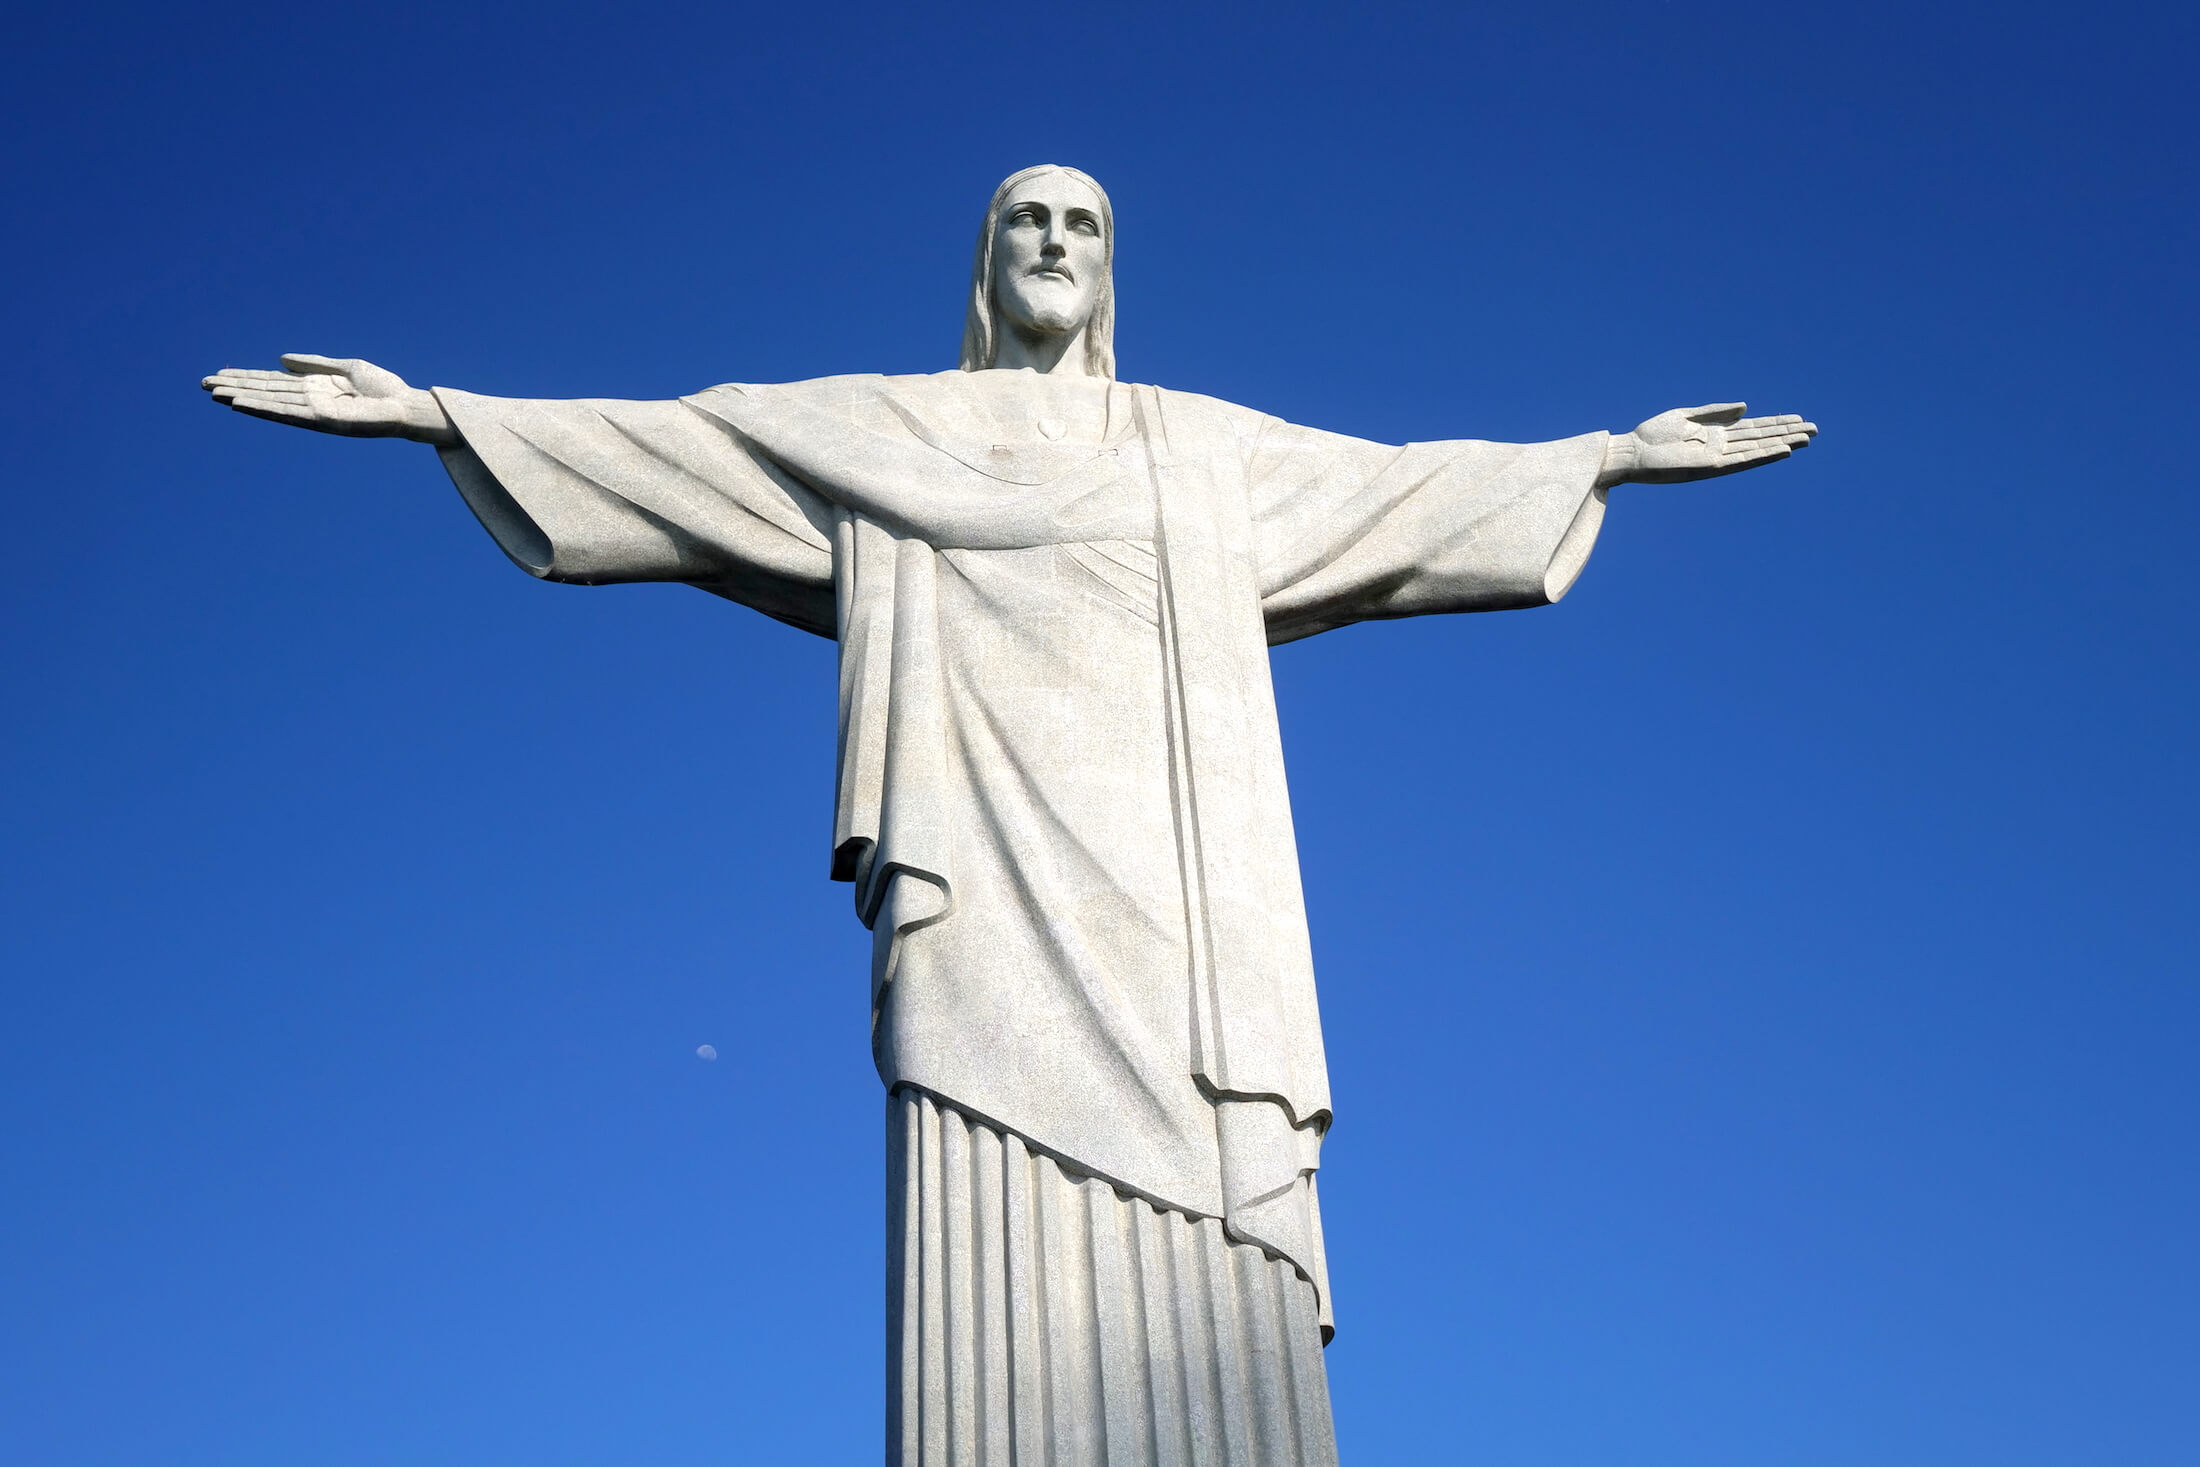 In Rio De Janeiro, this is a must, the statue is incredible, and there is an Amazing view looking over the city as well